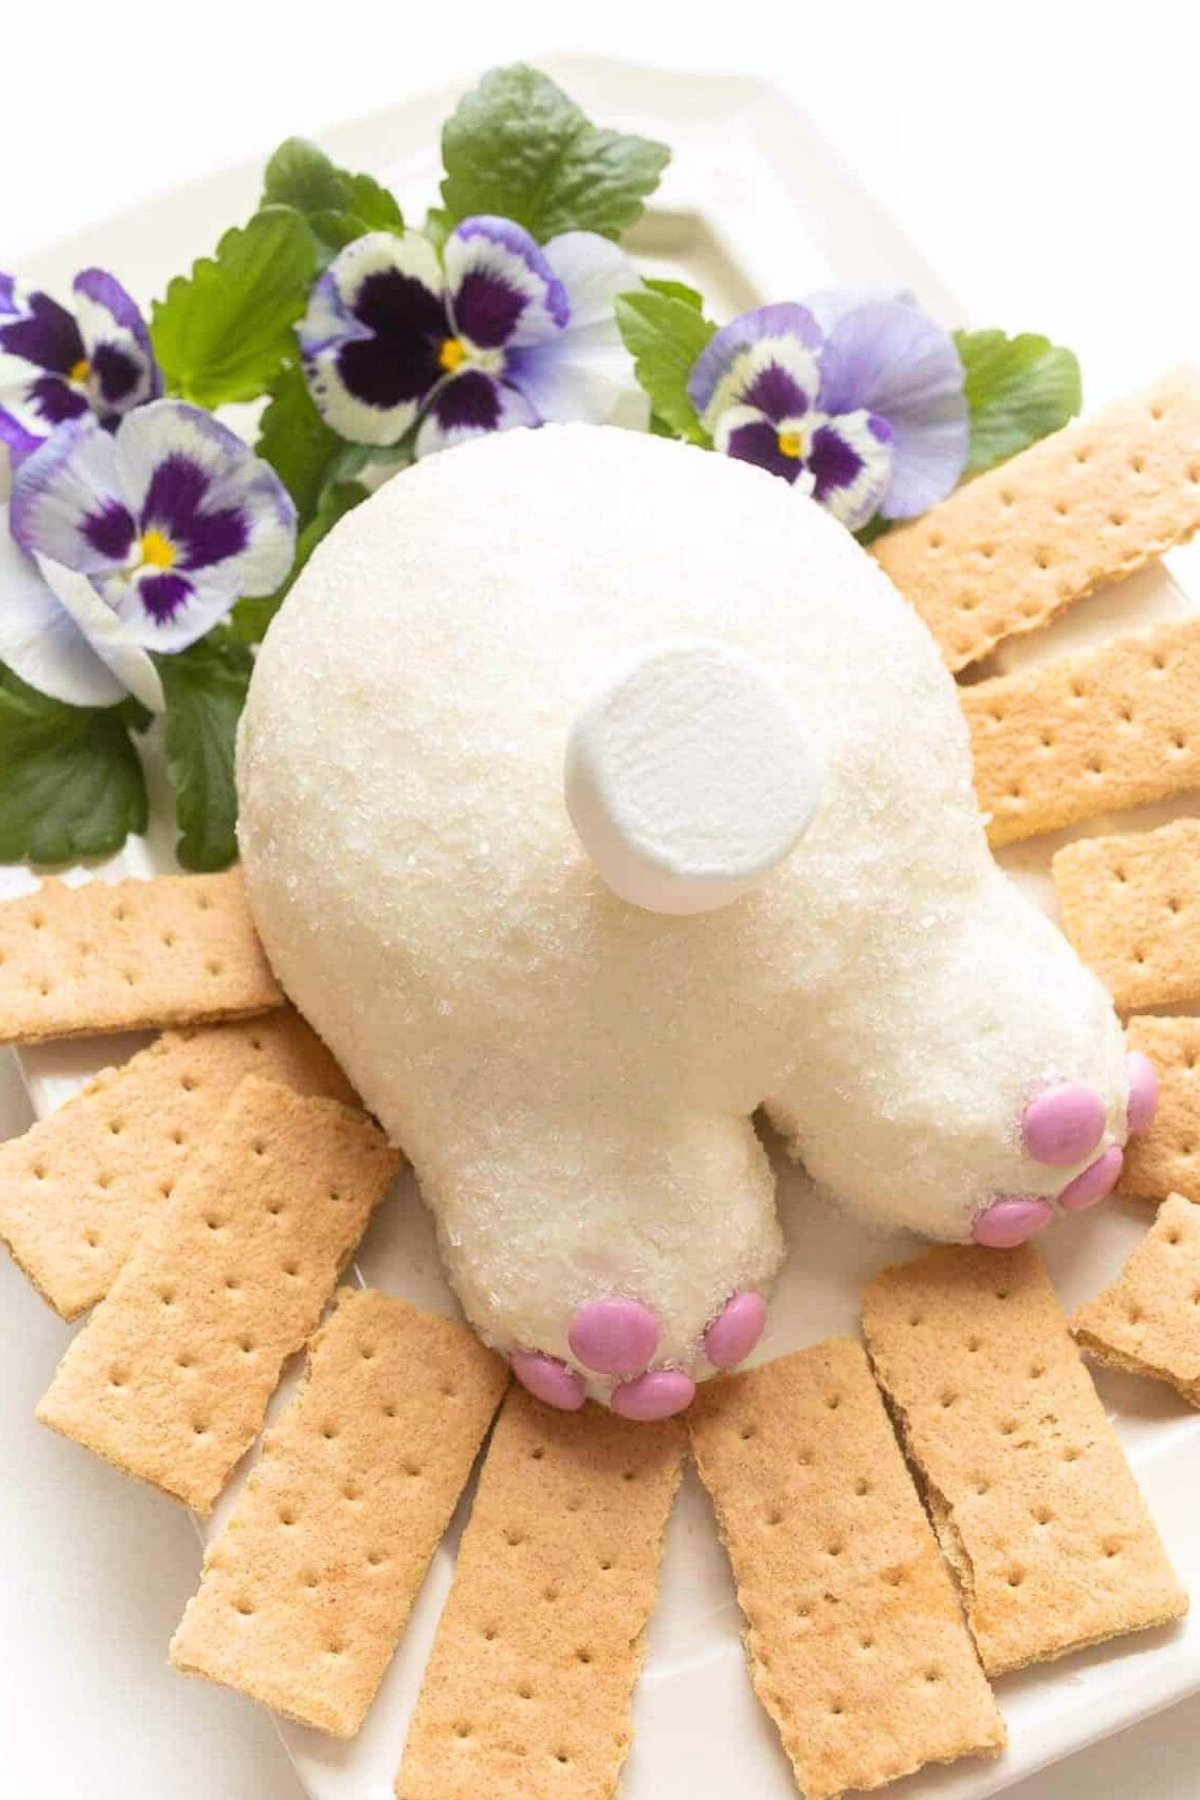 A bunny dessert cheeseball surrounded by fresh flowers and graham crackers